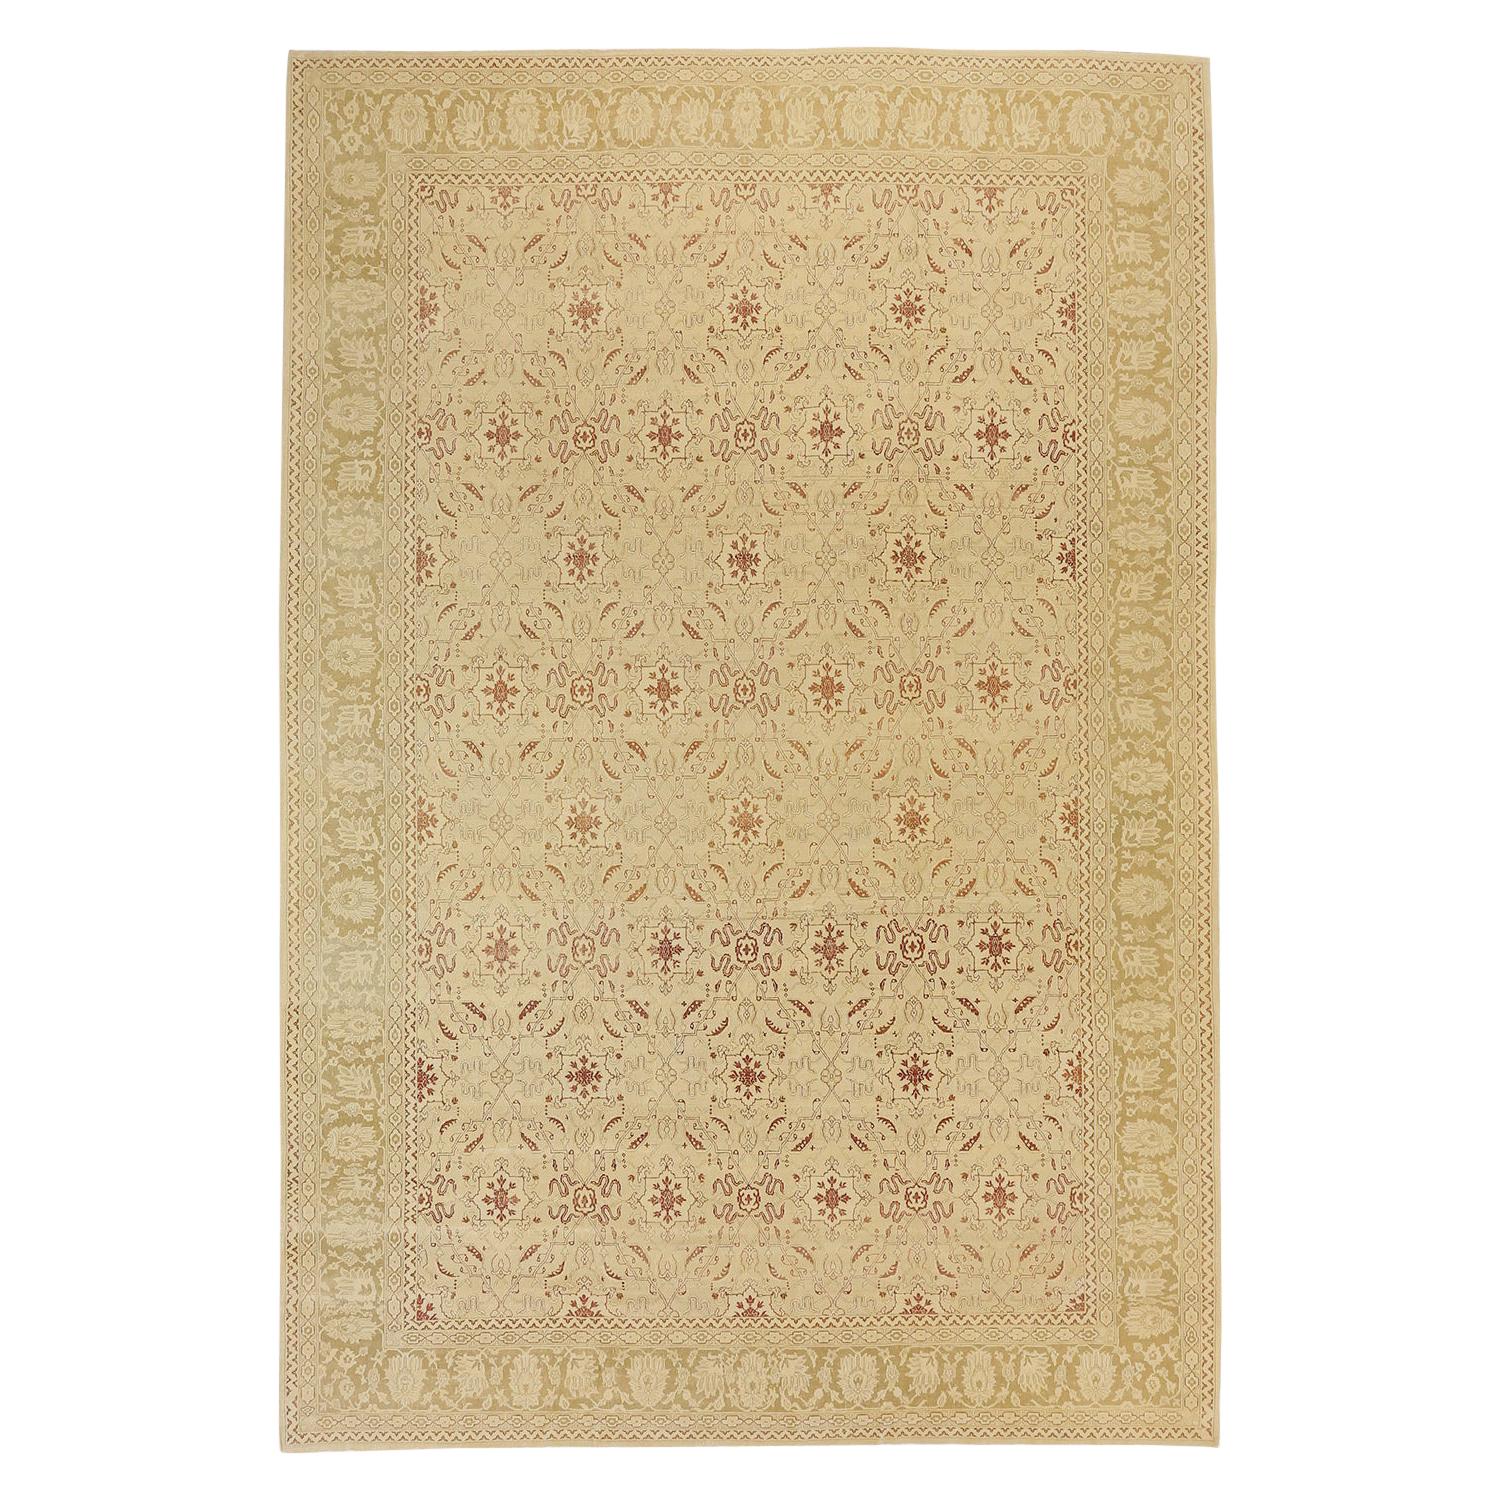 Antique Turkish Agra Rug with Beige and Red Botanical Field